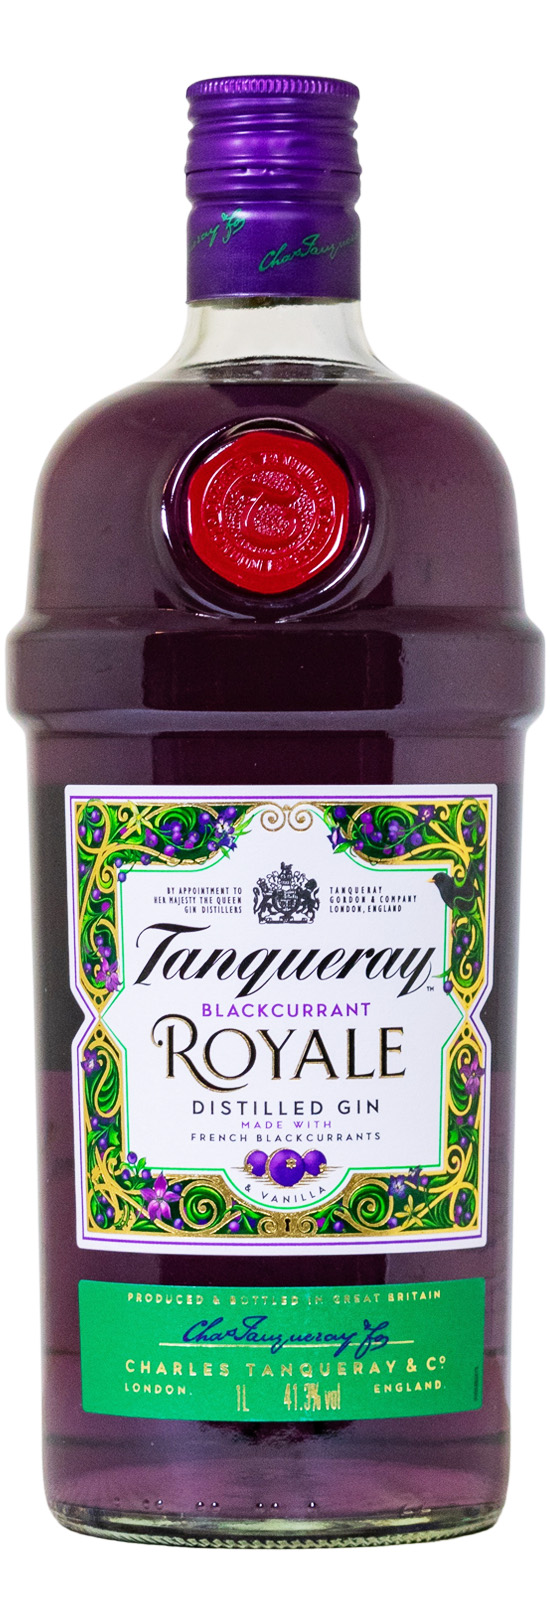 Tanqueray Blackcurrant Royale Gin - 1 Liter 41,3% vol